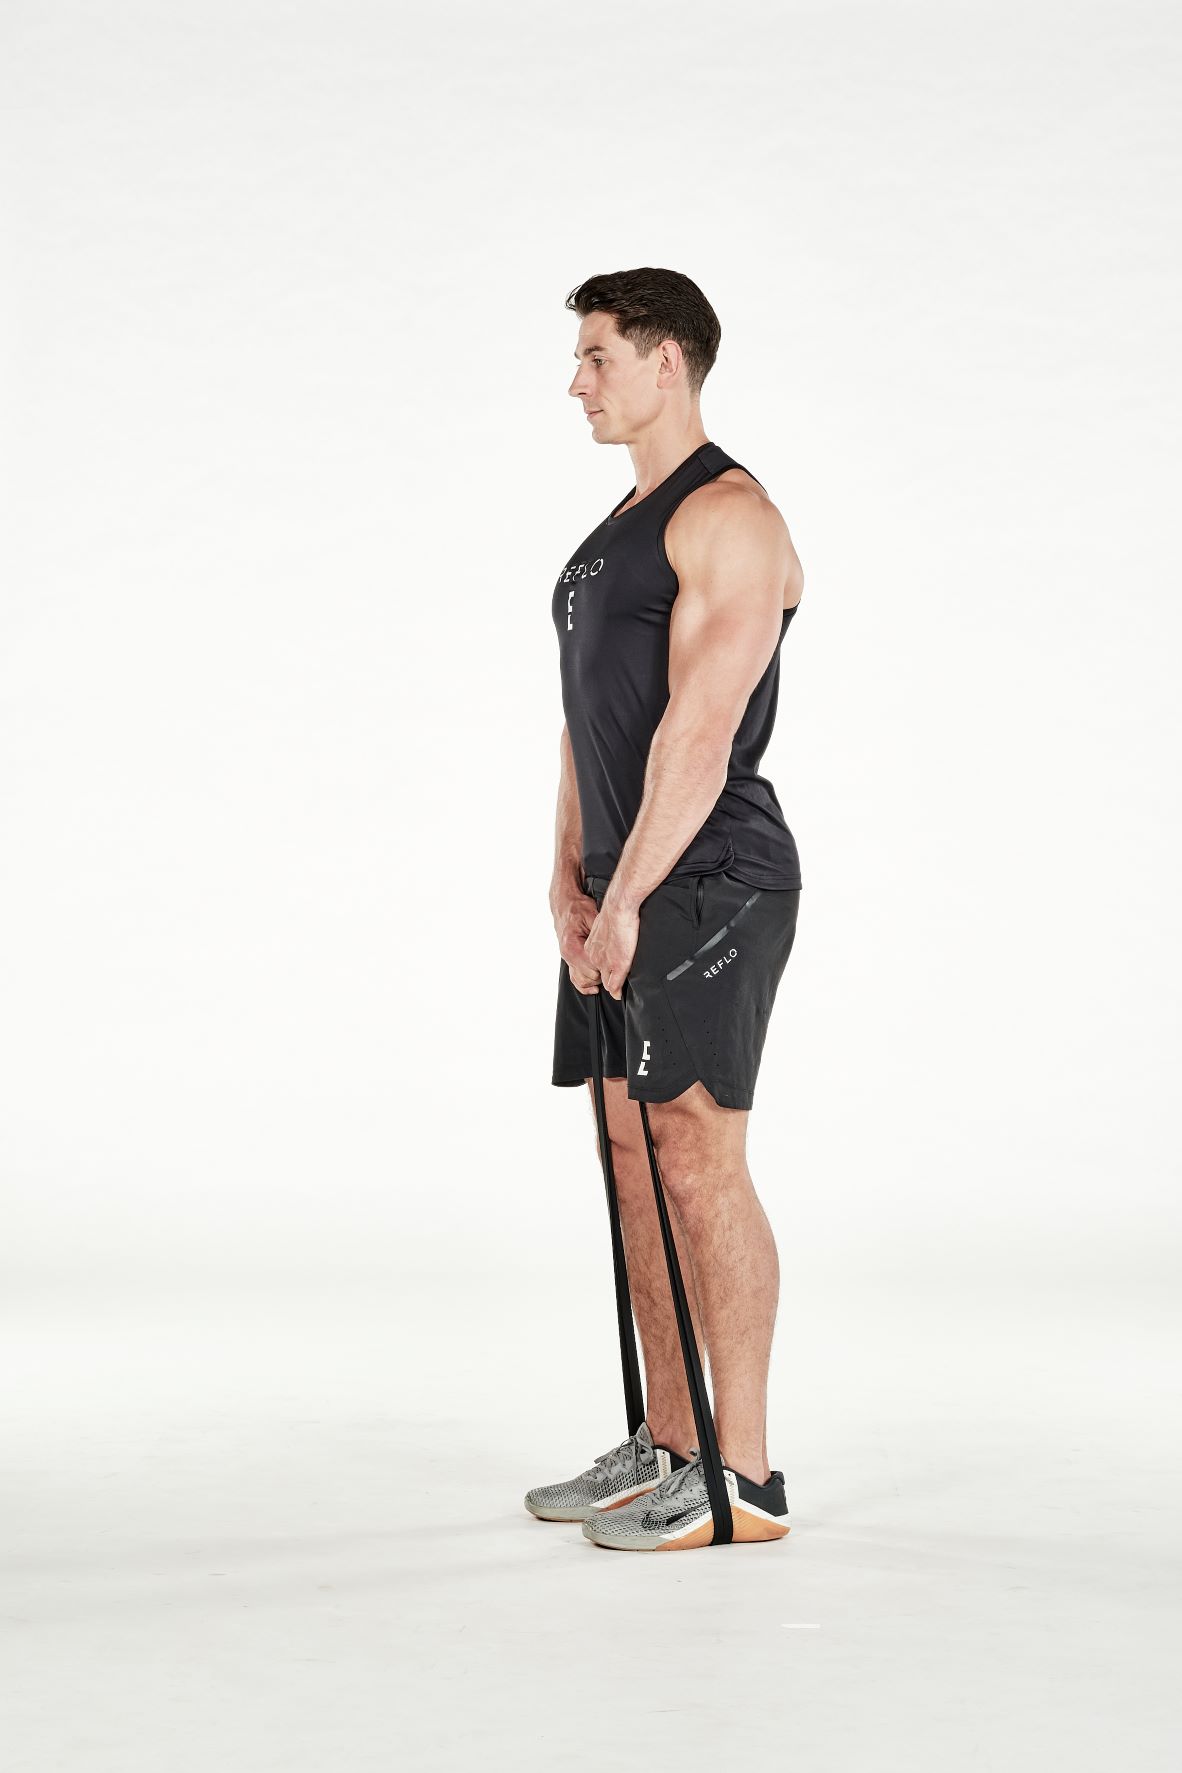 man demonstrating step two of band deadlift; he is standing up straight, holding a band that is wrapped around his feet; he wears a black fitness vest, black shorts and trainers